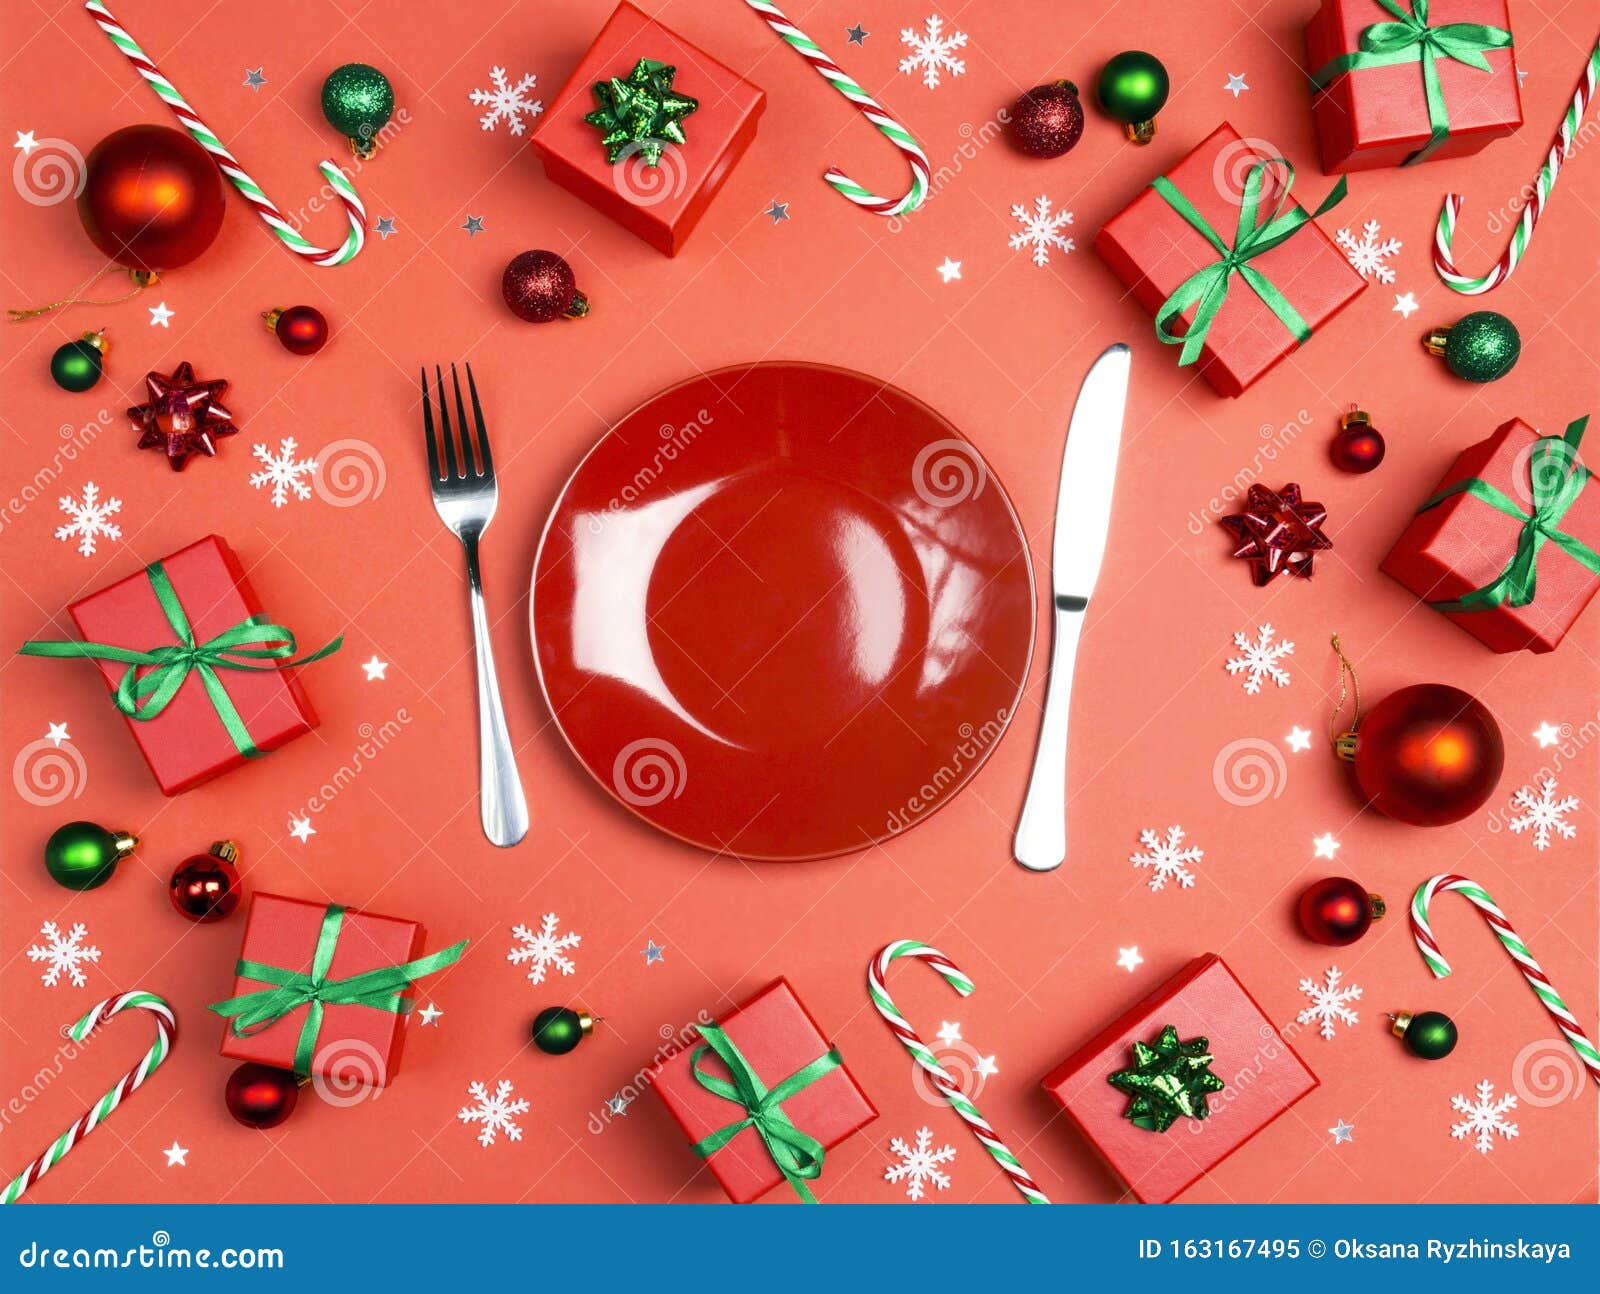 Christmas Festive Table Setting with Cutlery and Decorations on a Red ...